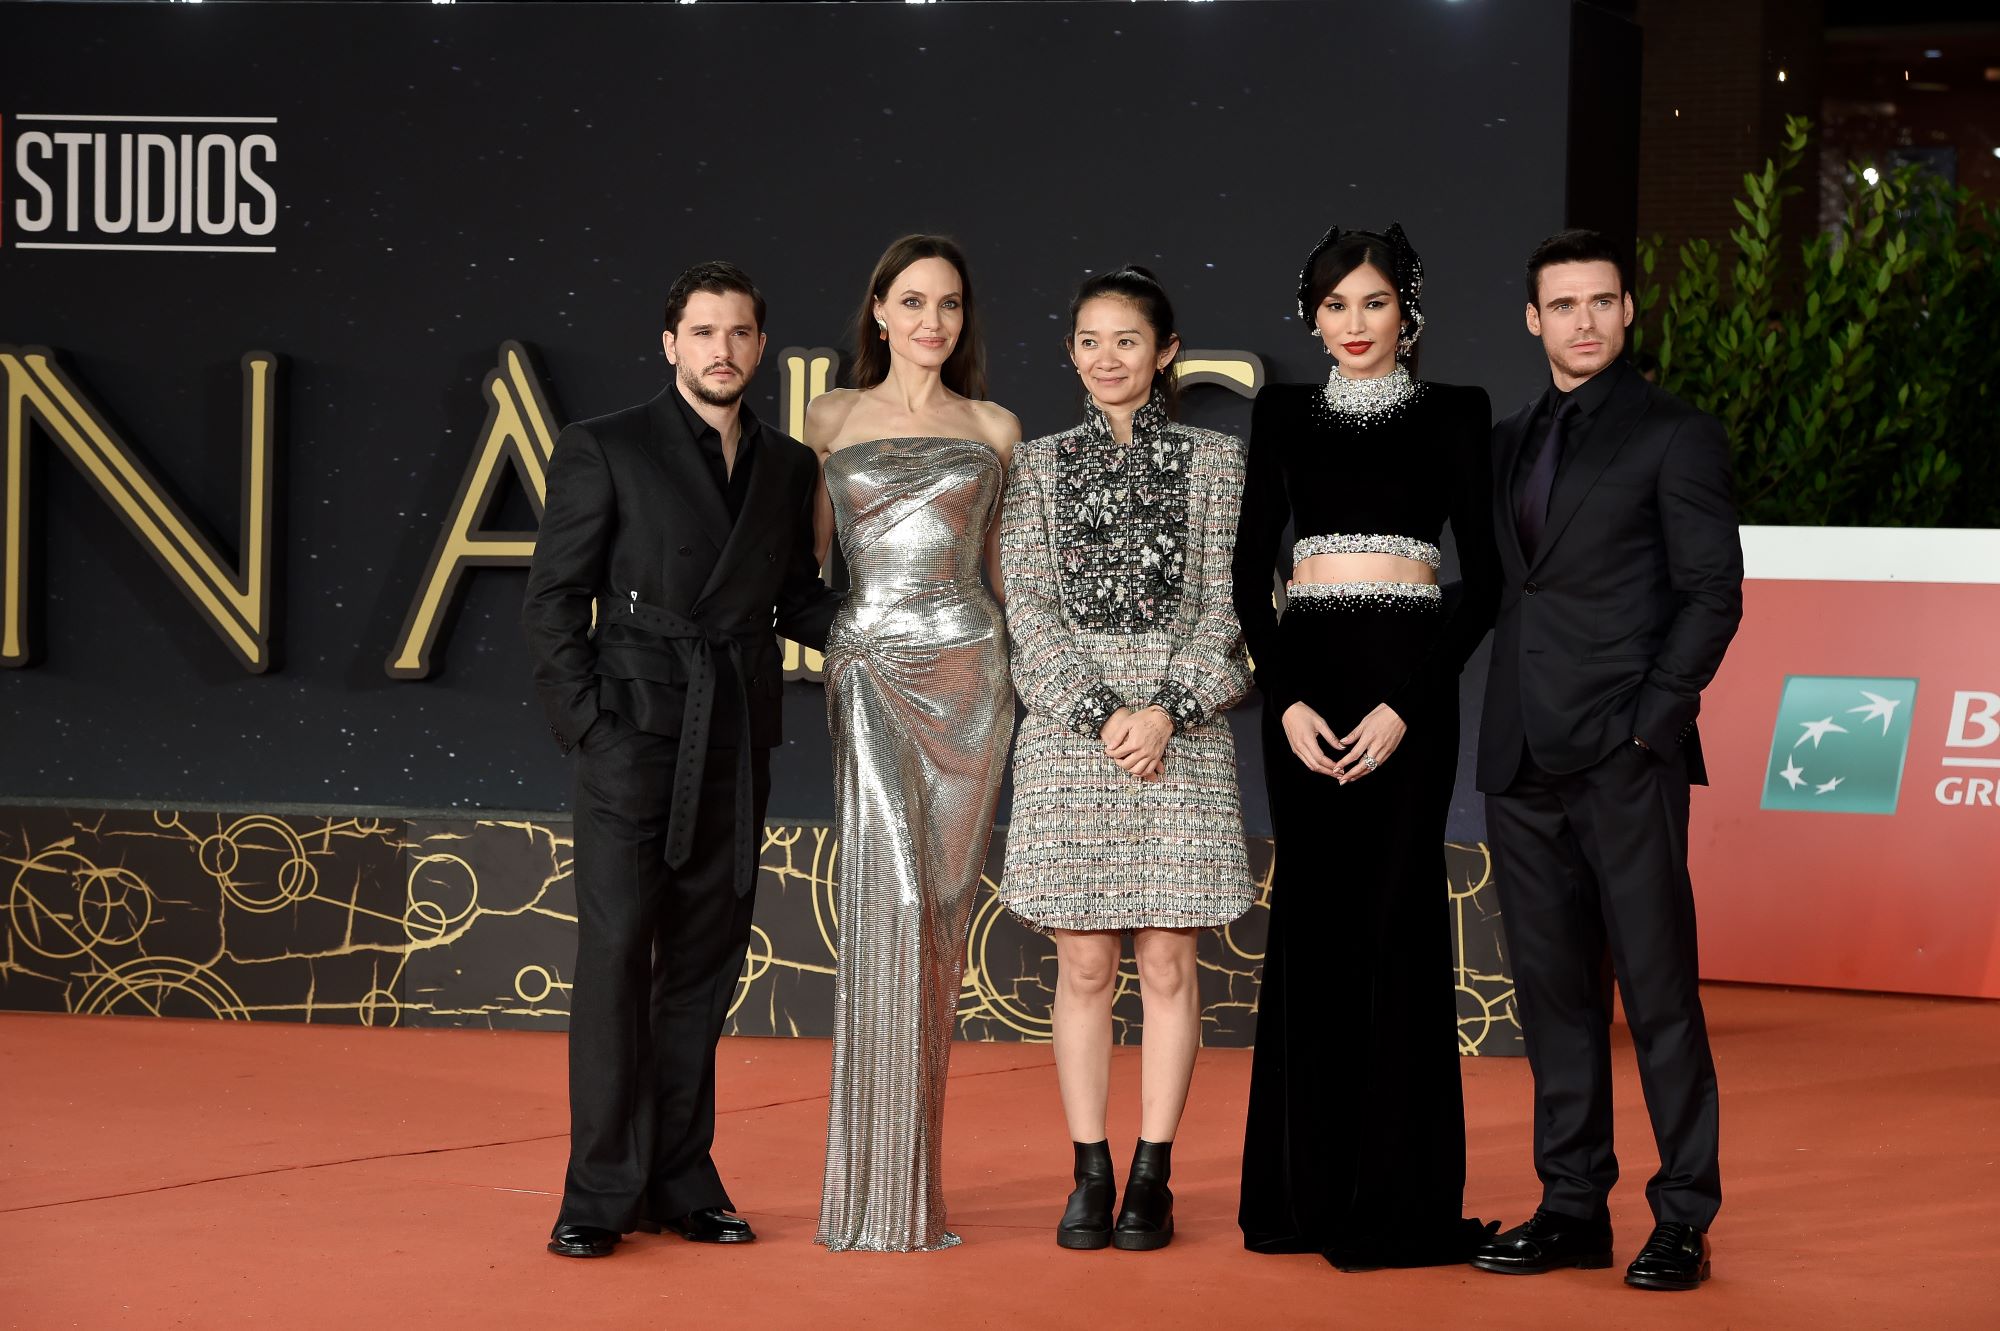 The 'Eternals' cast and crew, Kit Harington, Angelina Jolie, Chloé Zhao, Gemma Chan, and Richard Madden, pose together on the red carpet. Harington and Madden wears black suits. Jolie wears a long strapless silver dress. Zhao wears a knee-length gray and black long-sleeved dress. Chan wears a long black long-sleeved dress. 'Eternals' is now on Disney+ and is rumored to have a sequel in the works.